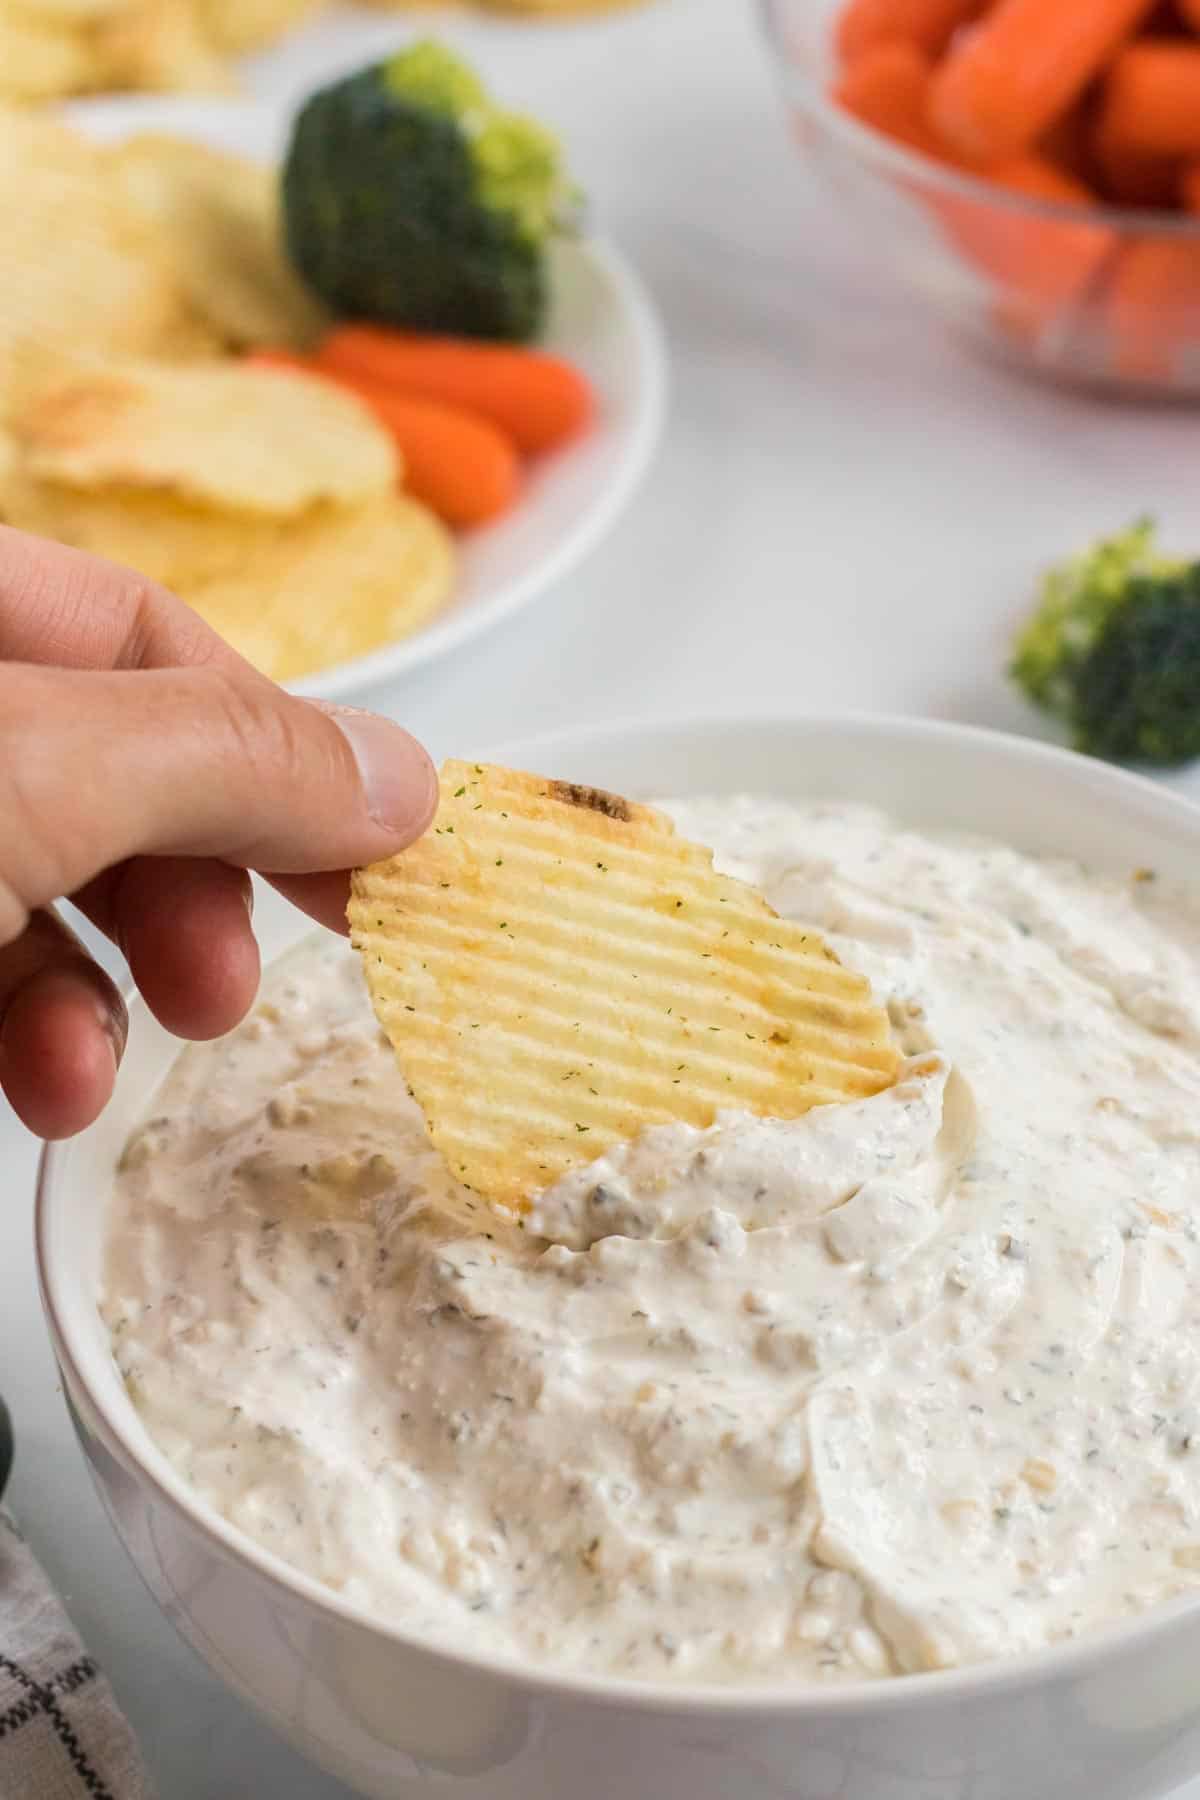 chip being dipped into a chip dip